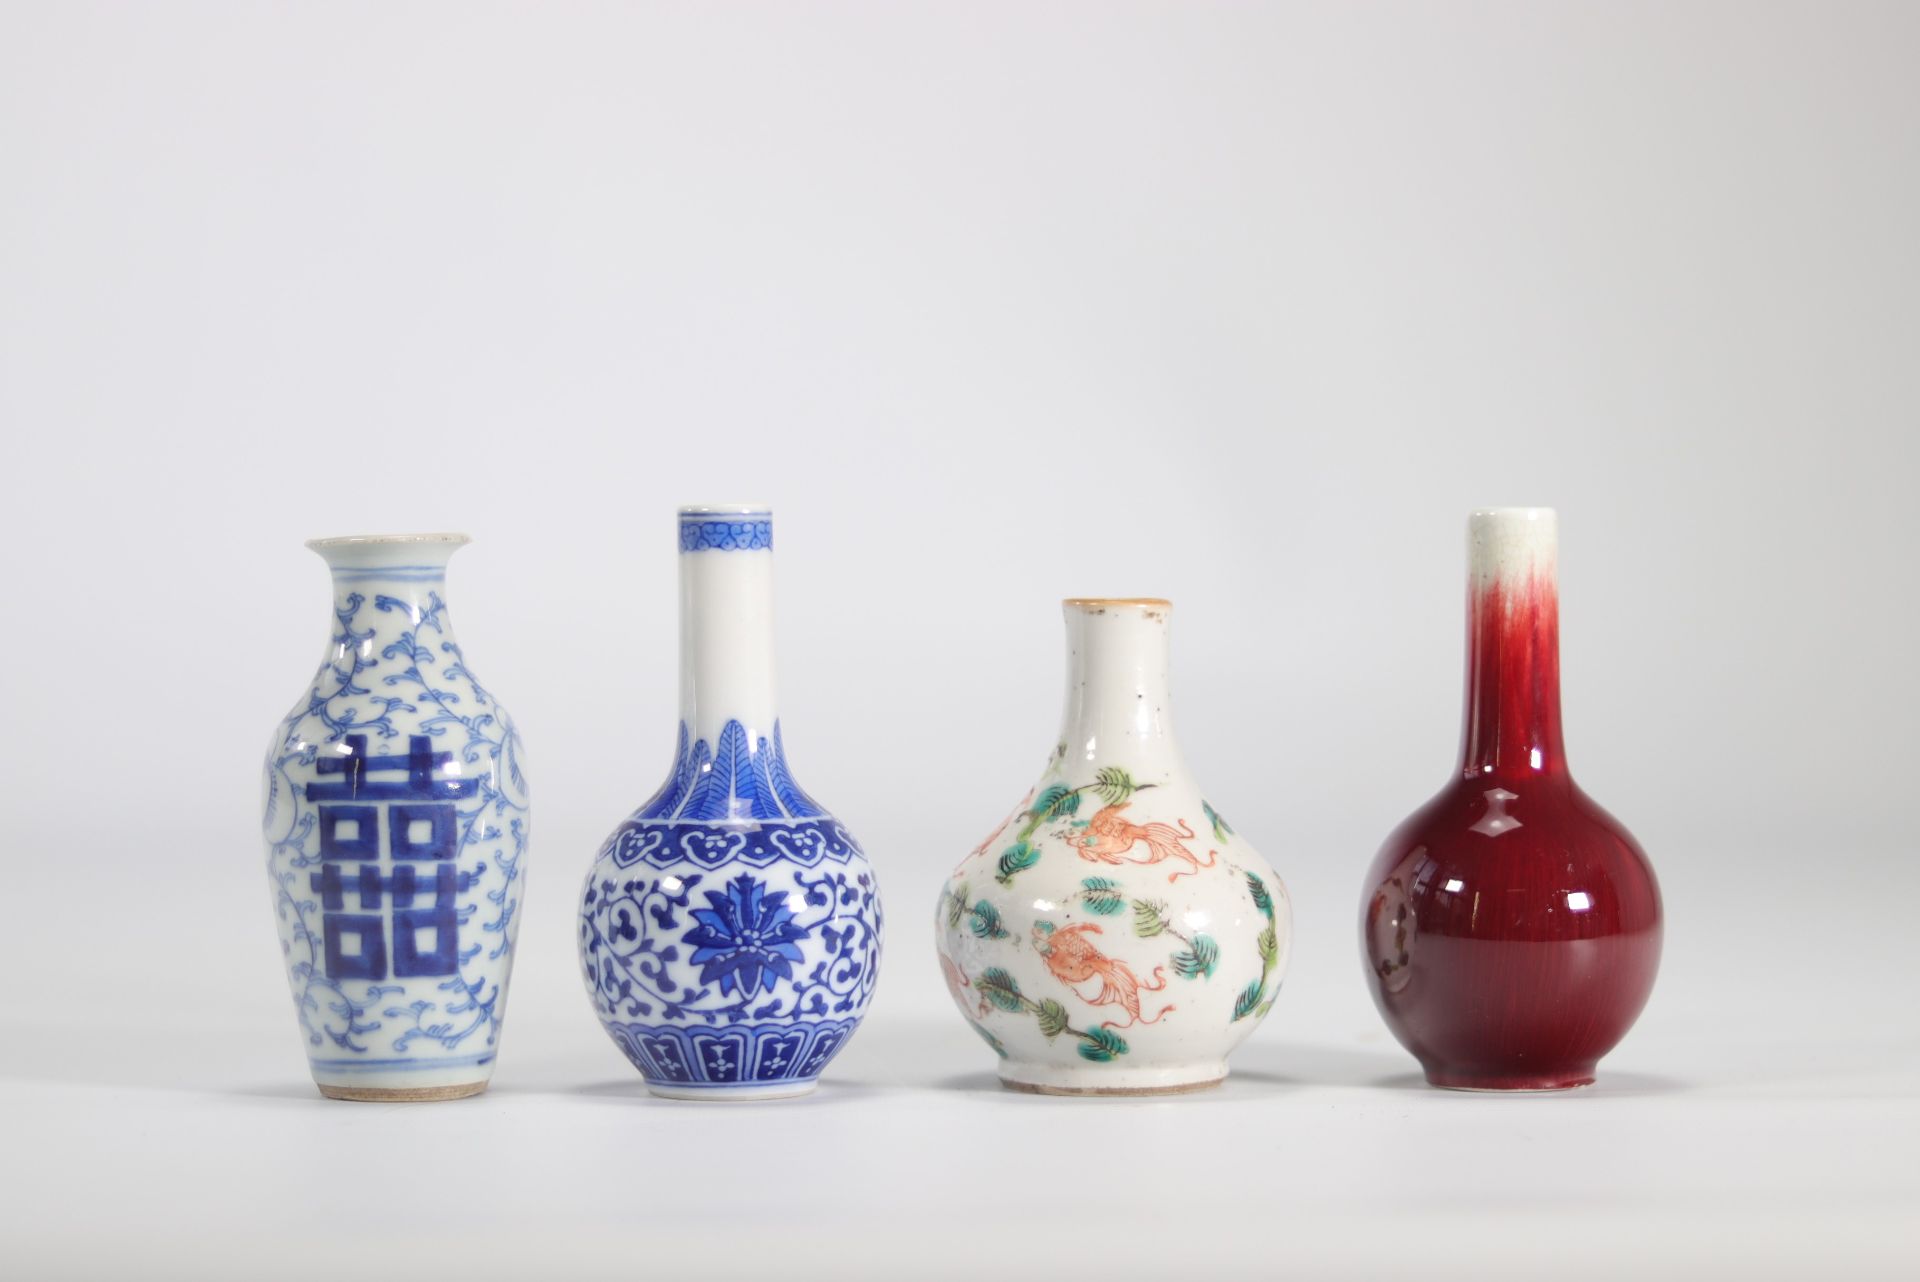 (4) Set of porcelain vases in white, blue and oxblood from Qing period (æ¸…æœ)